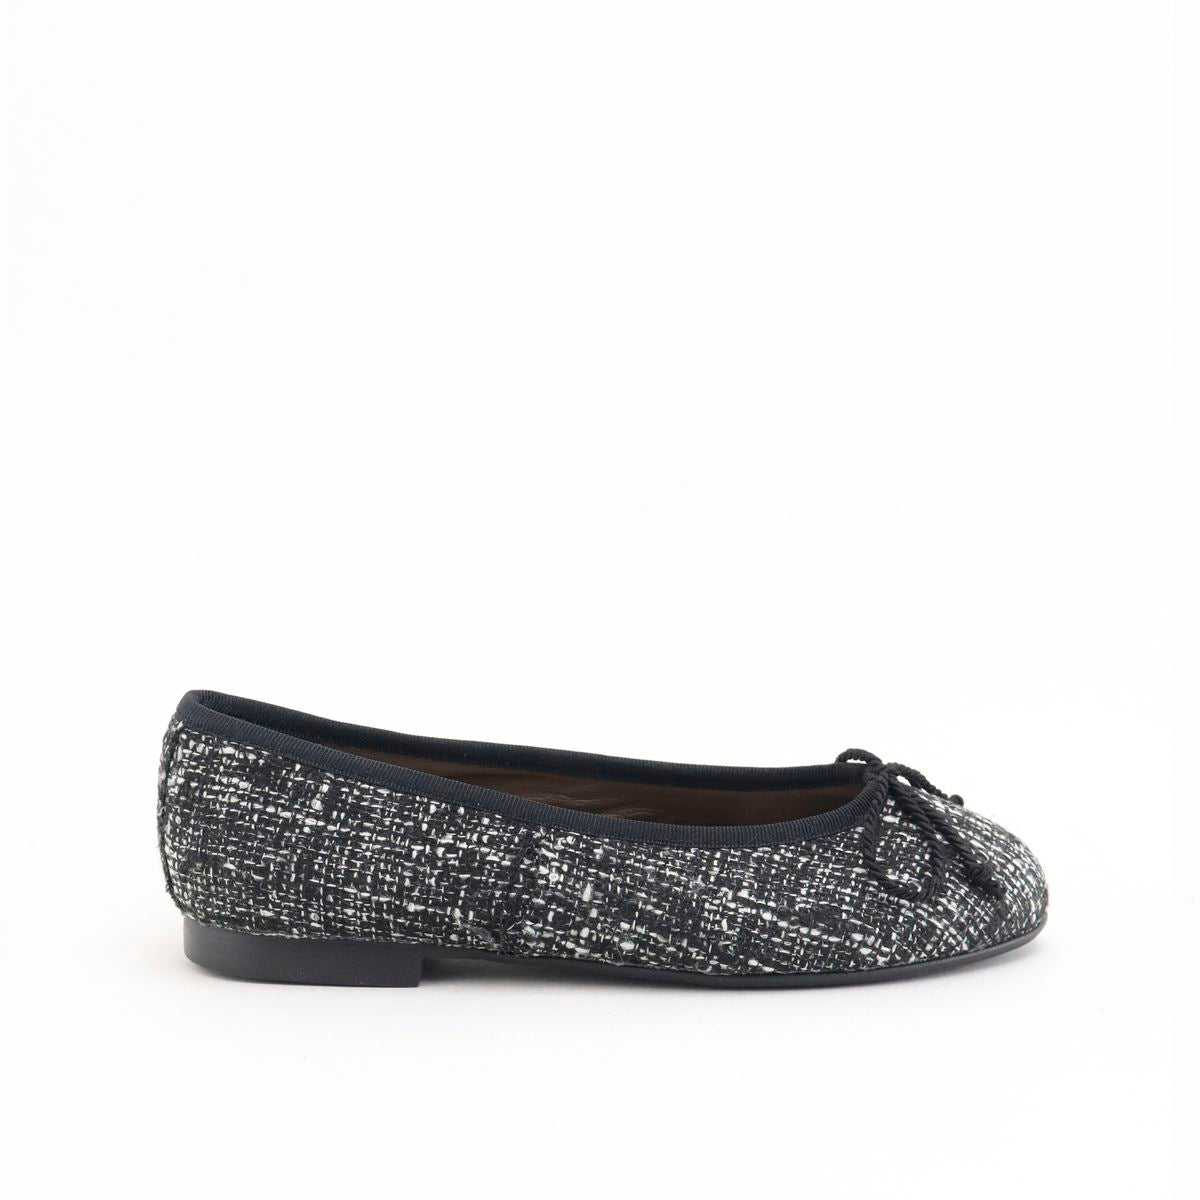 London Quilt Black Tweed (LON03) - French Sole